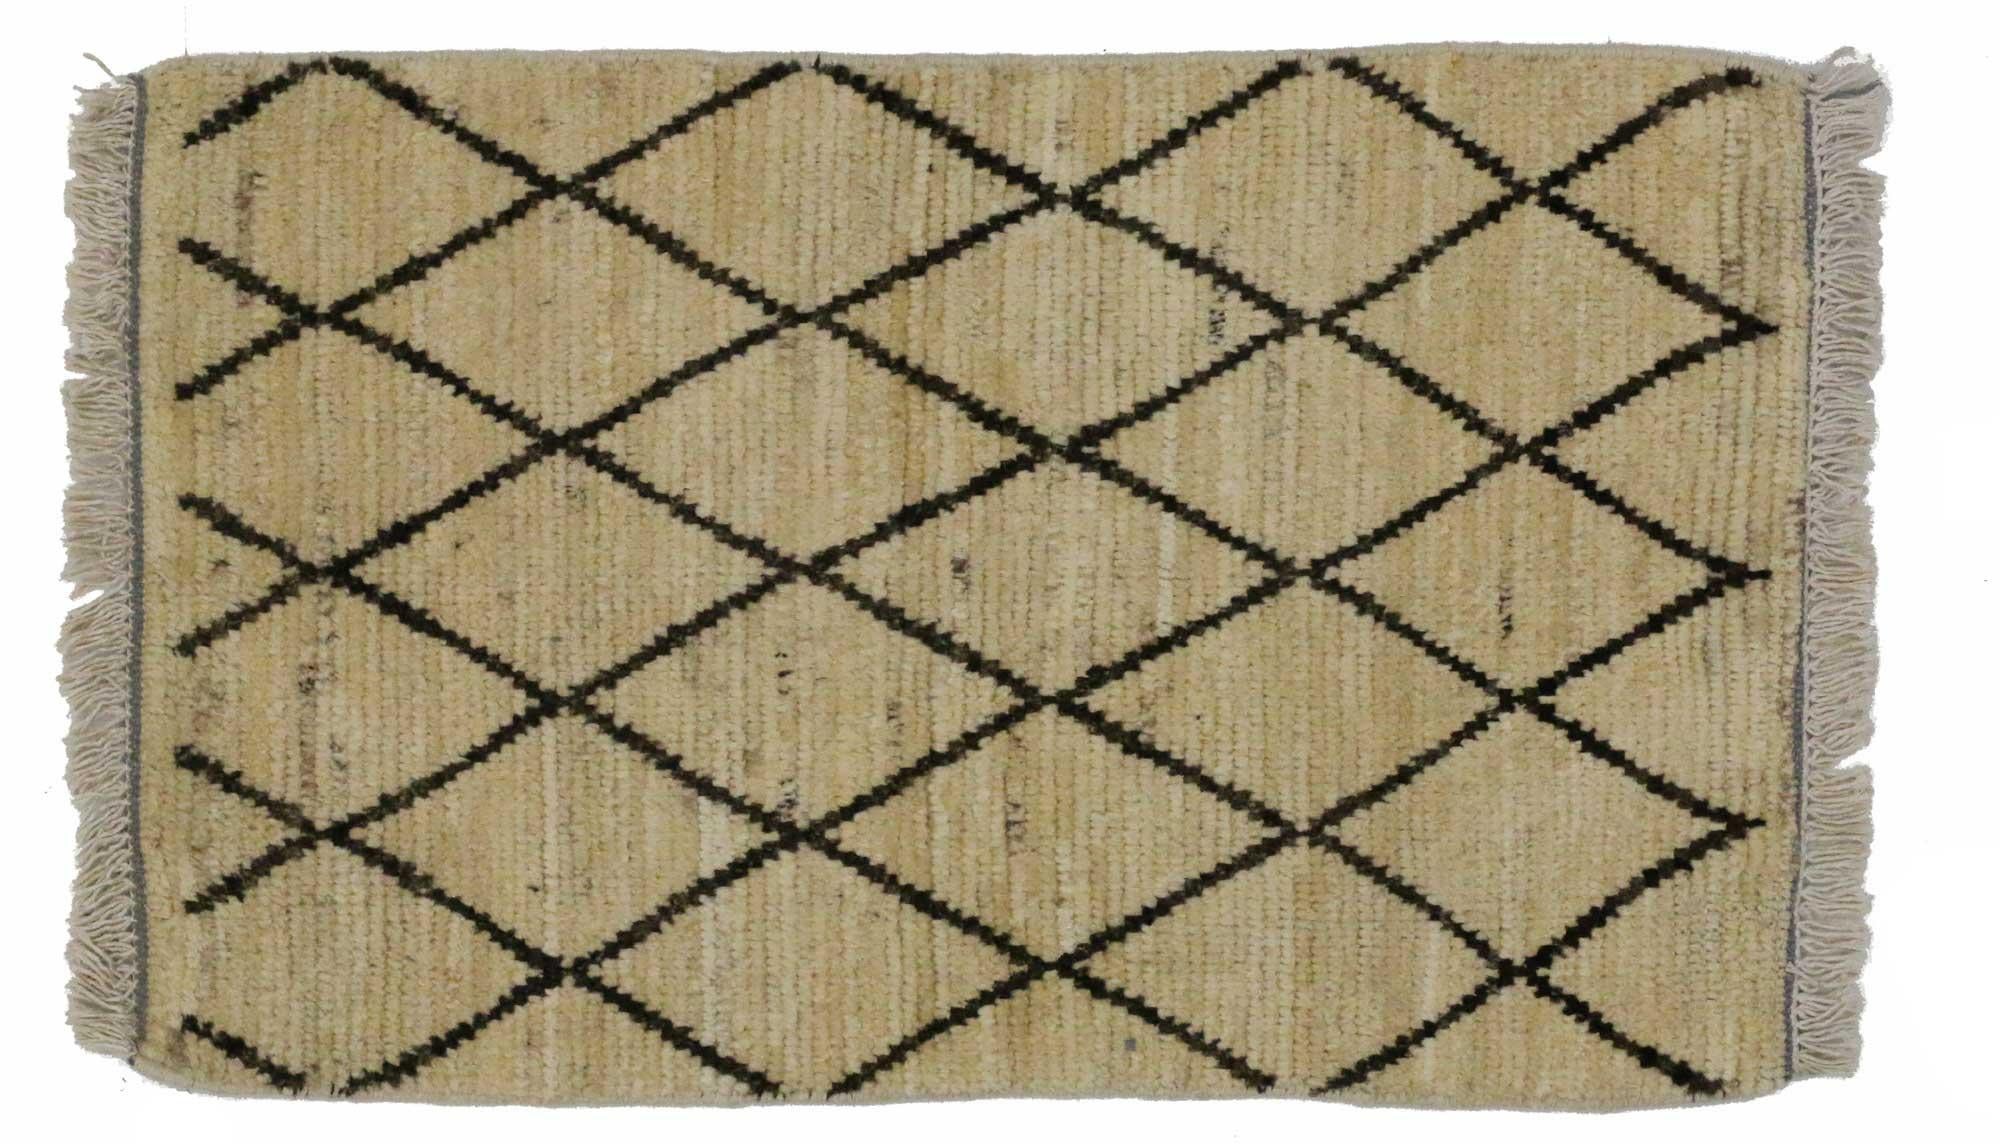 Hand-Knotted Modern Moroccan Style Accent Rug, Kitchen, Bath Mat, Foyer or Entry Rug